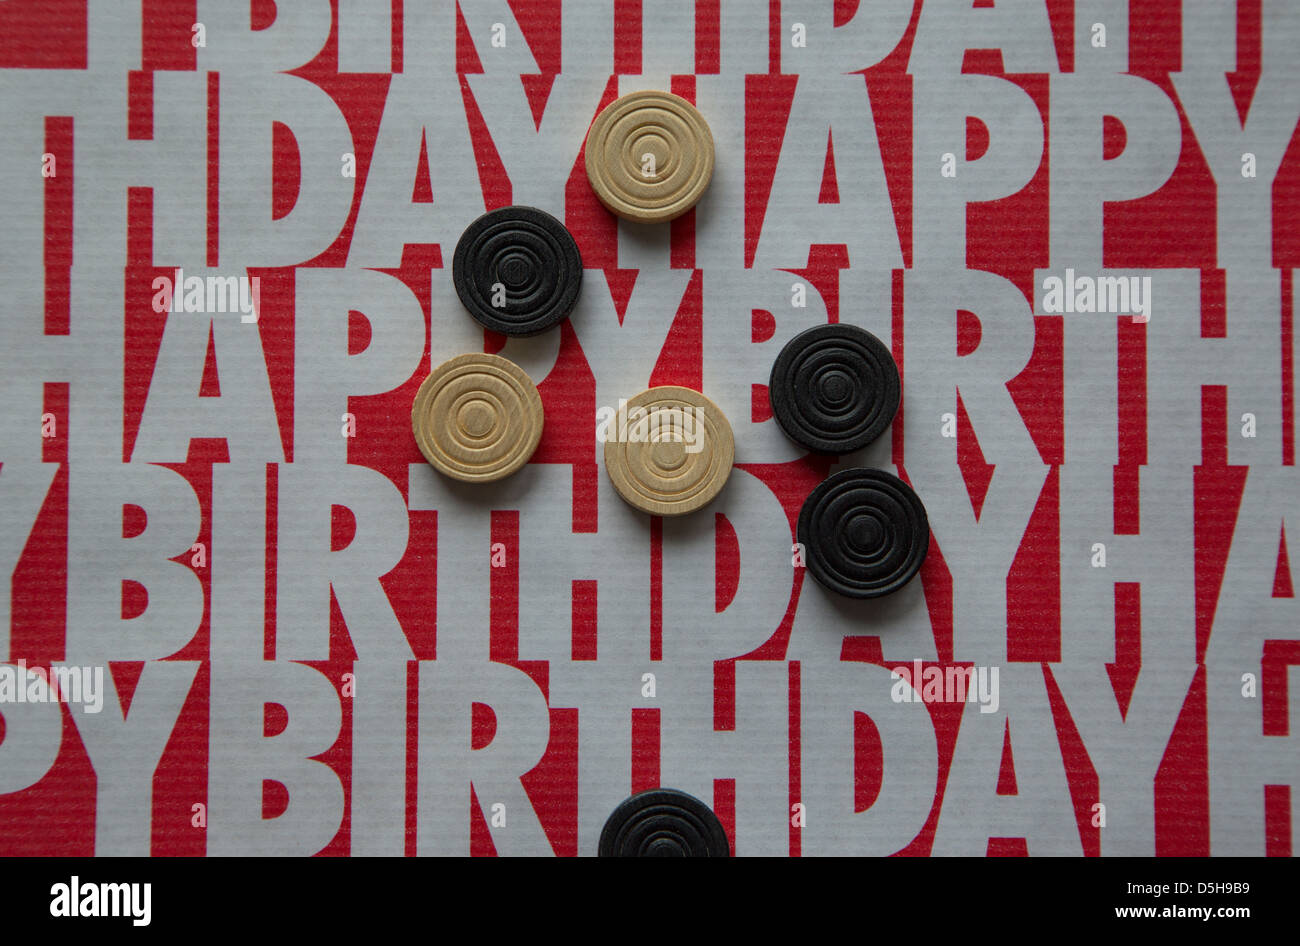 A shot of some 'happy birthday' wrapping paper in contrasting red and white colors Stock Photo